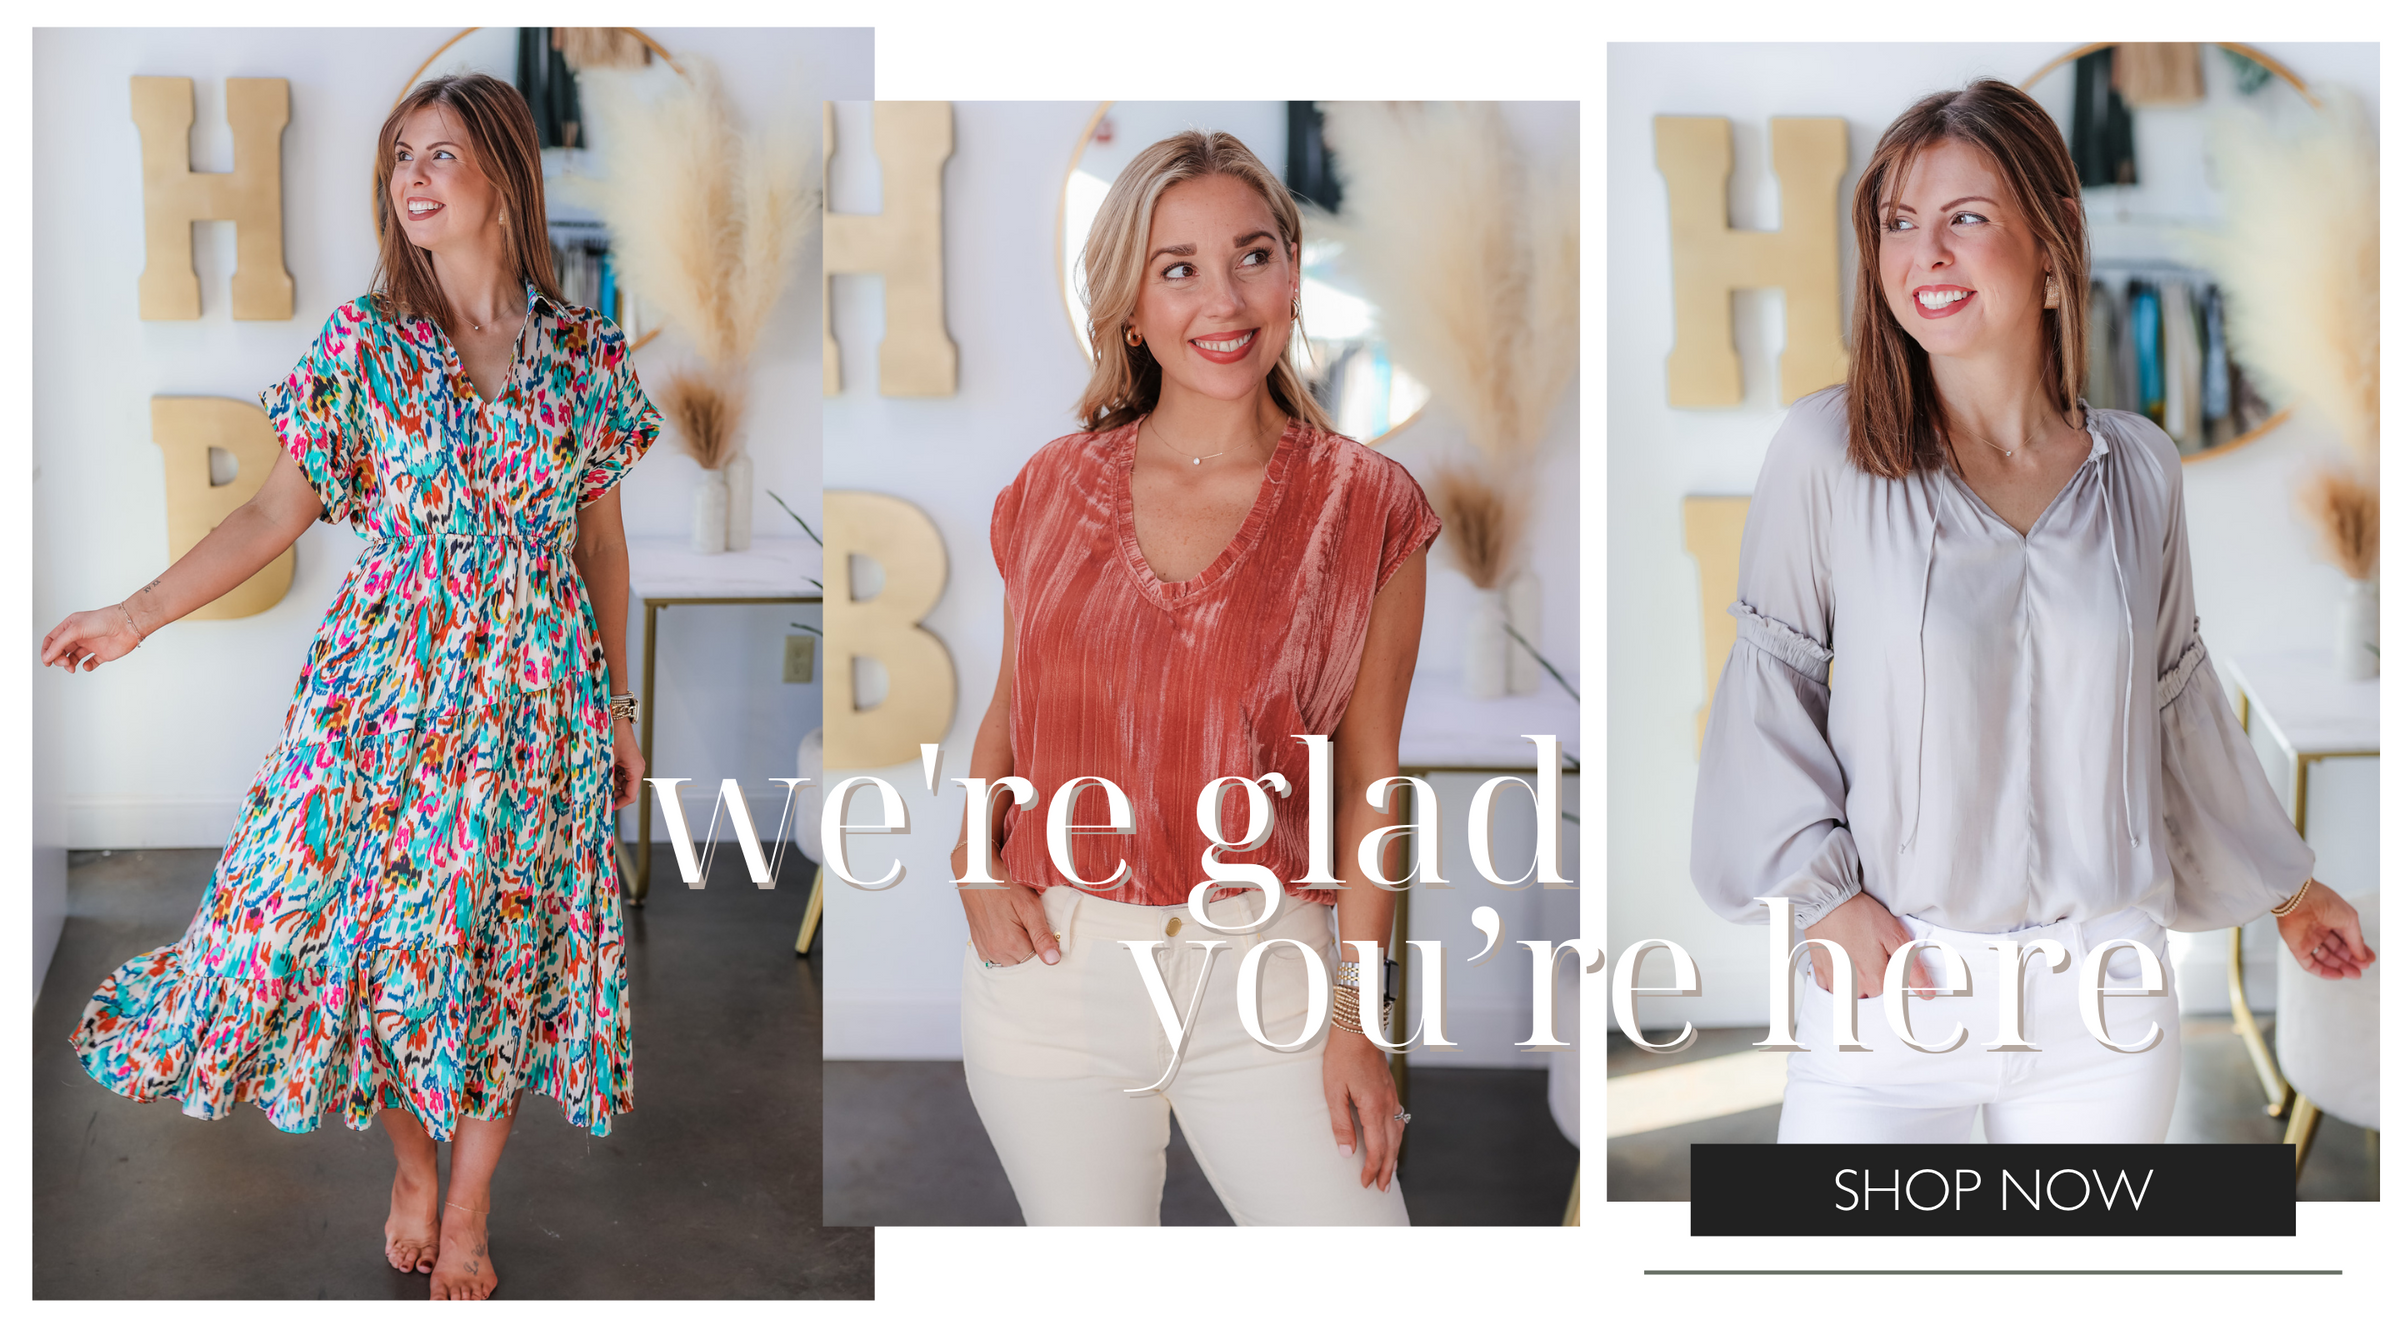 Three images side by side all take place in Ivy House Boutique store. The first photo shows a brunette girl wearing a midi length colorful dress. The second image shows a blond girl wearing a pink velvet top and cream jeans. And the third photo shows the brunette girl wearing a gray long sleeve top and white jeans. Overlay says "We're glad you're here" with a button that says Shop Now